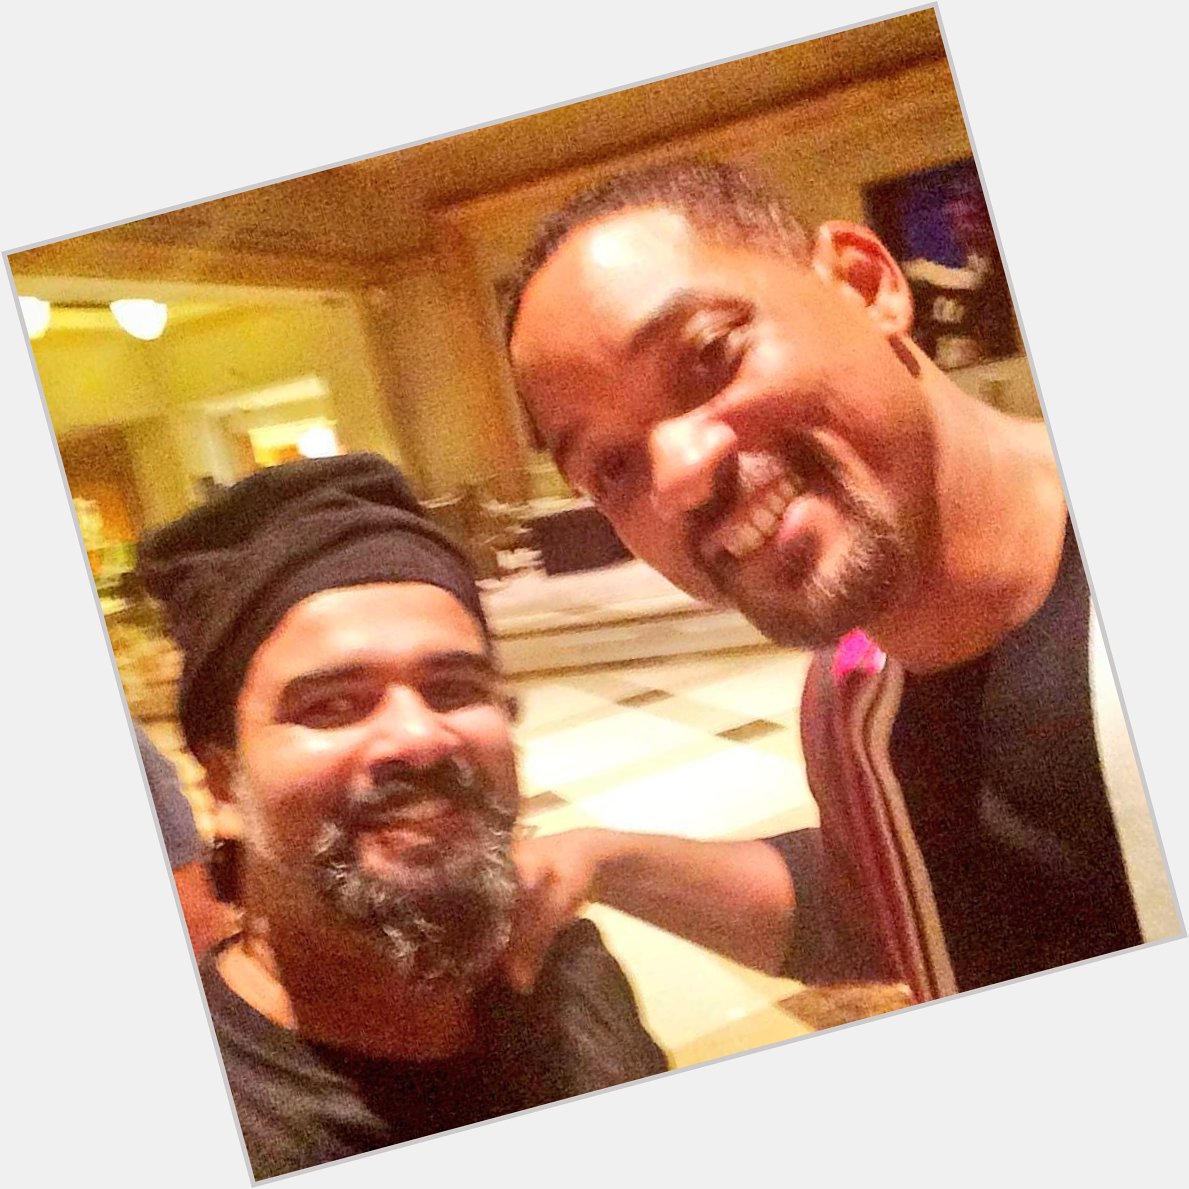 Wish you a very happy birthday will Smith, Stay happy n keep entertaining us with the best !!  